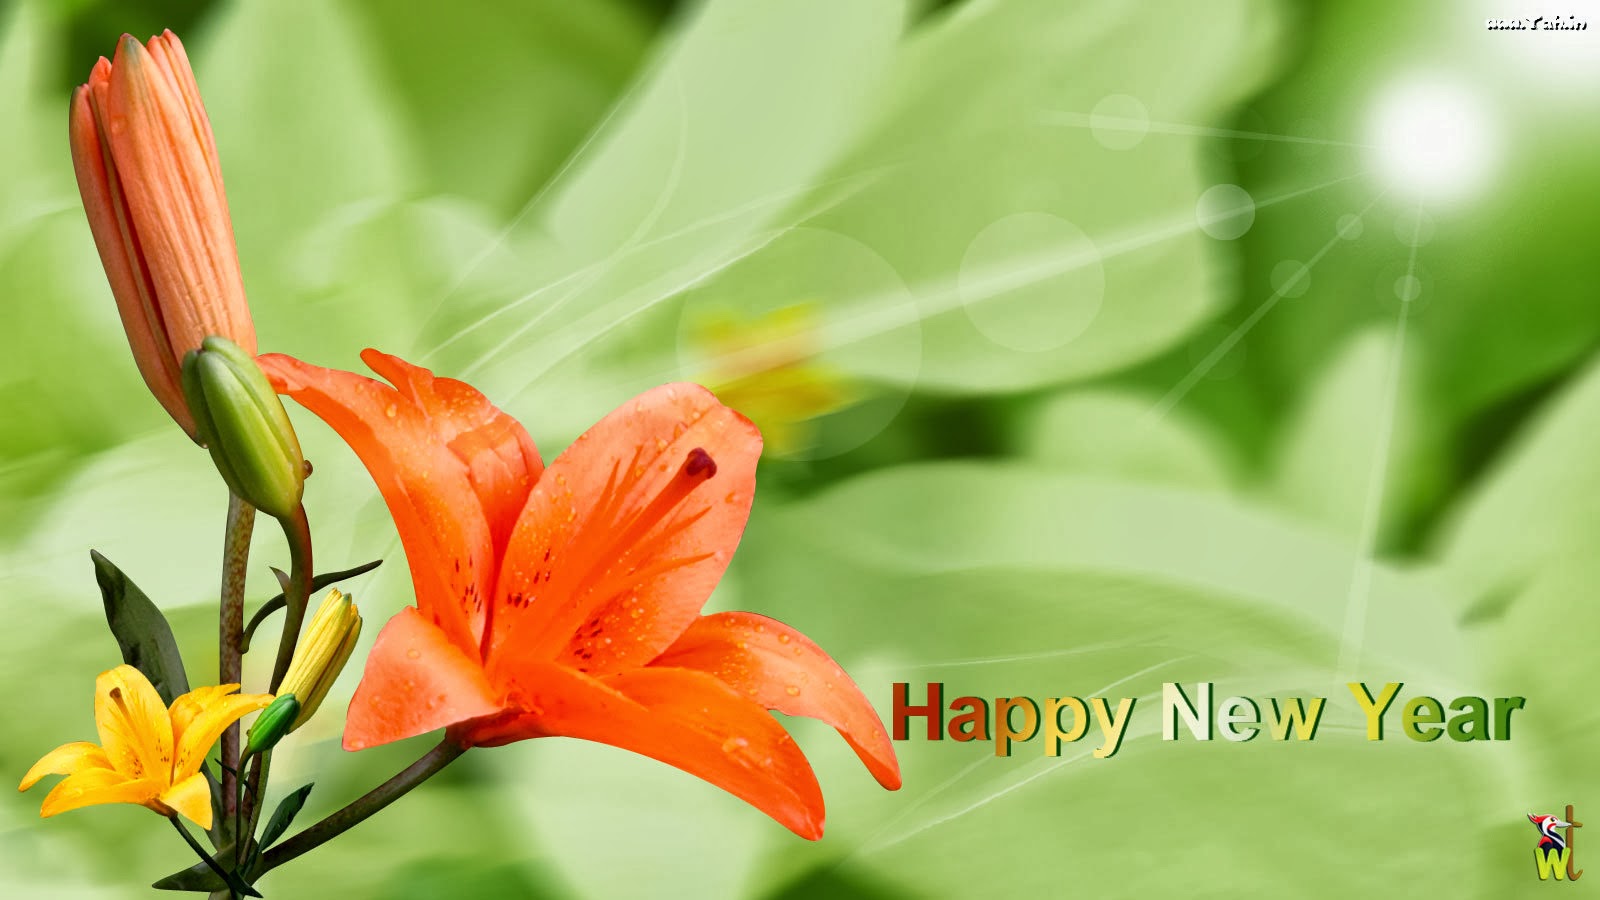 51+] Happy New Year With Flowers Wallpapers - WallpaperSafari